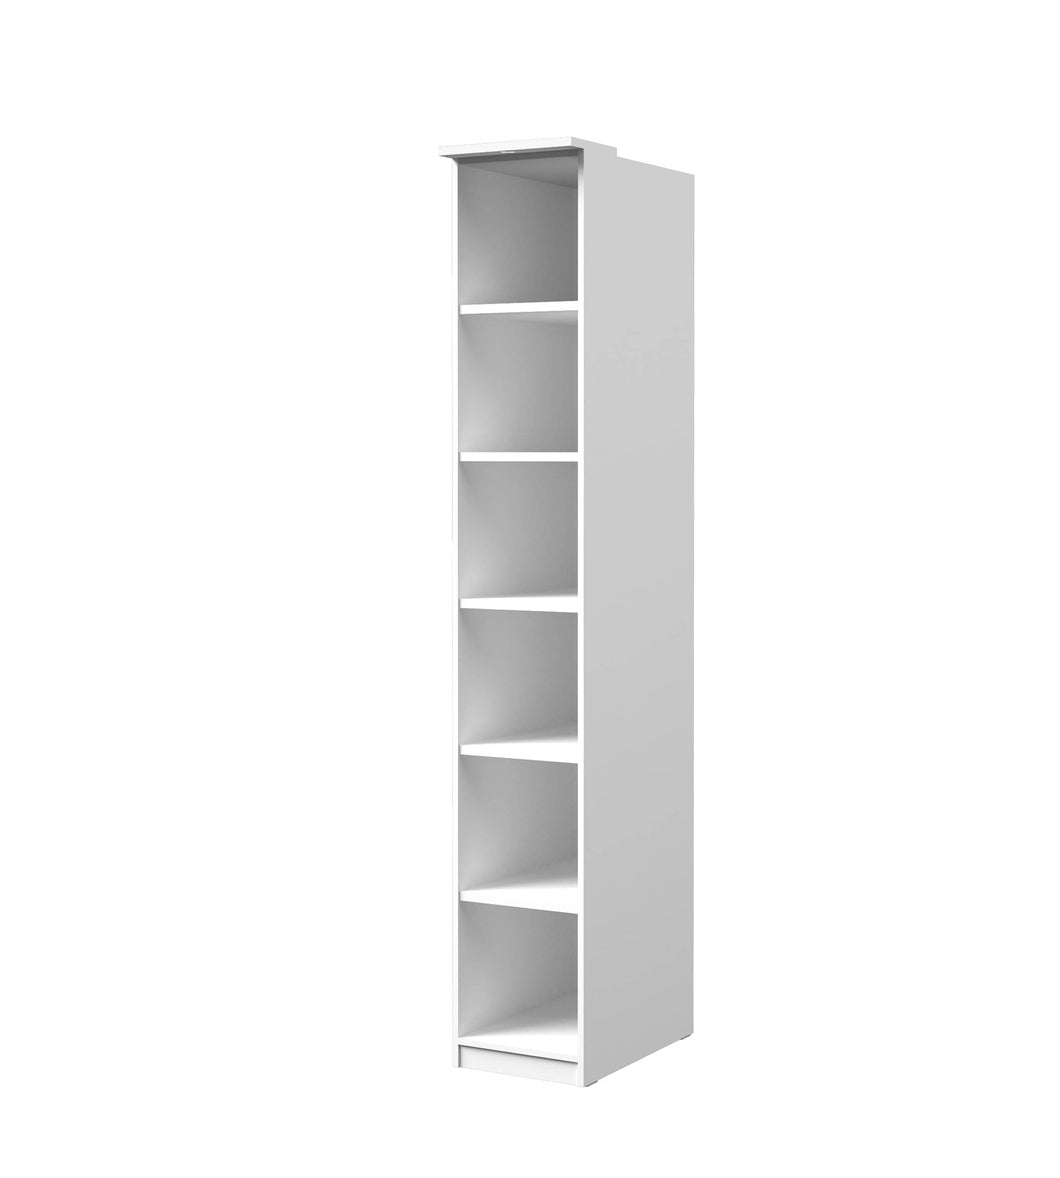 Optima 15 Bookcase Arte-N 2497KL15 The Optima bookcase is both an aesthetic practical addition to your home. It has six open compartments that offer space for books, decorations, souvenirs framed photos to enhance your living area’s functionality personalize. The high-quality craftsmanship impresses with its solid build, comes in two different colour schemes to suit your style. W35cm x H217cm x D63cm Colour: Carcass: White Matt Carcass: Oak Artisan Four Shelves Optional LED Lighting Matching Furniture Avail